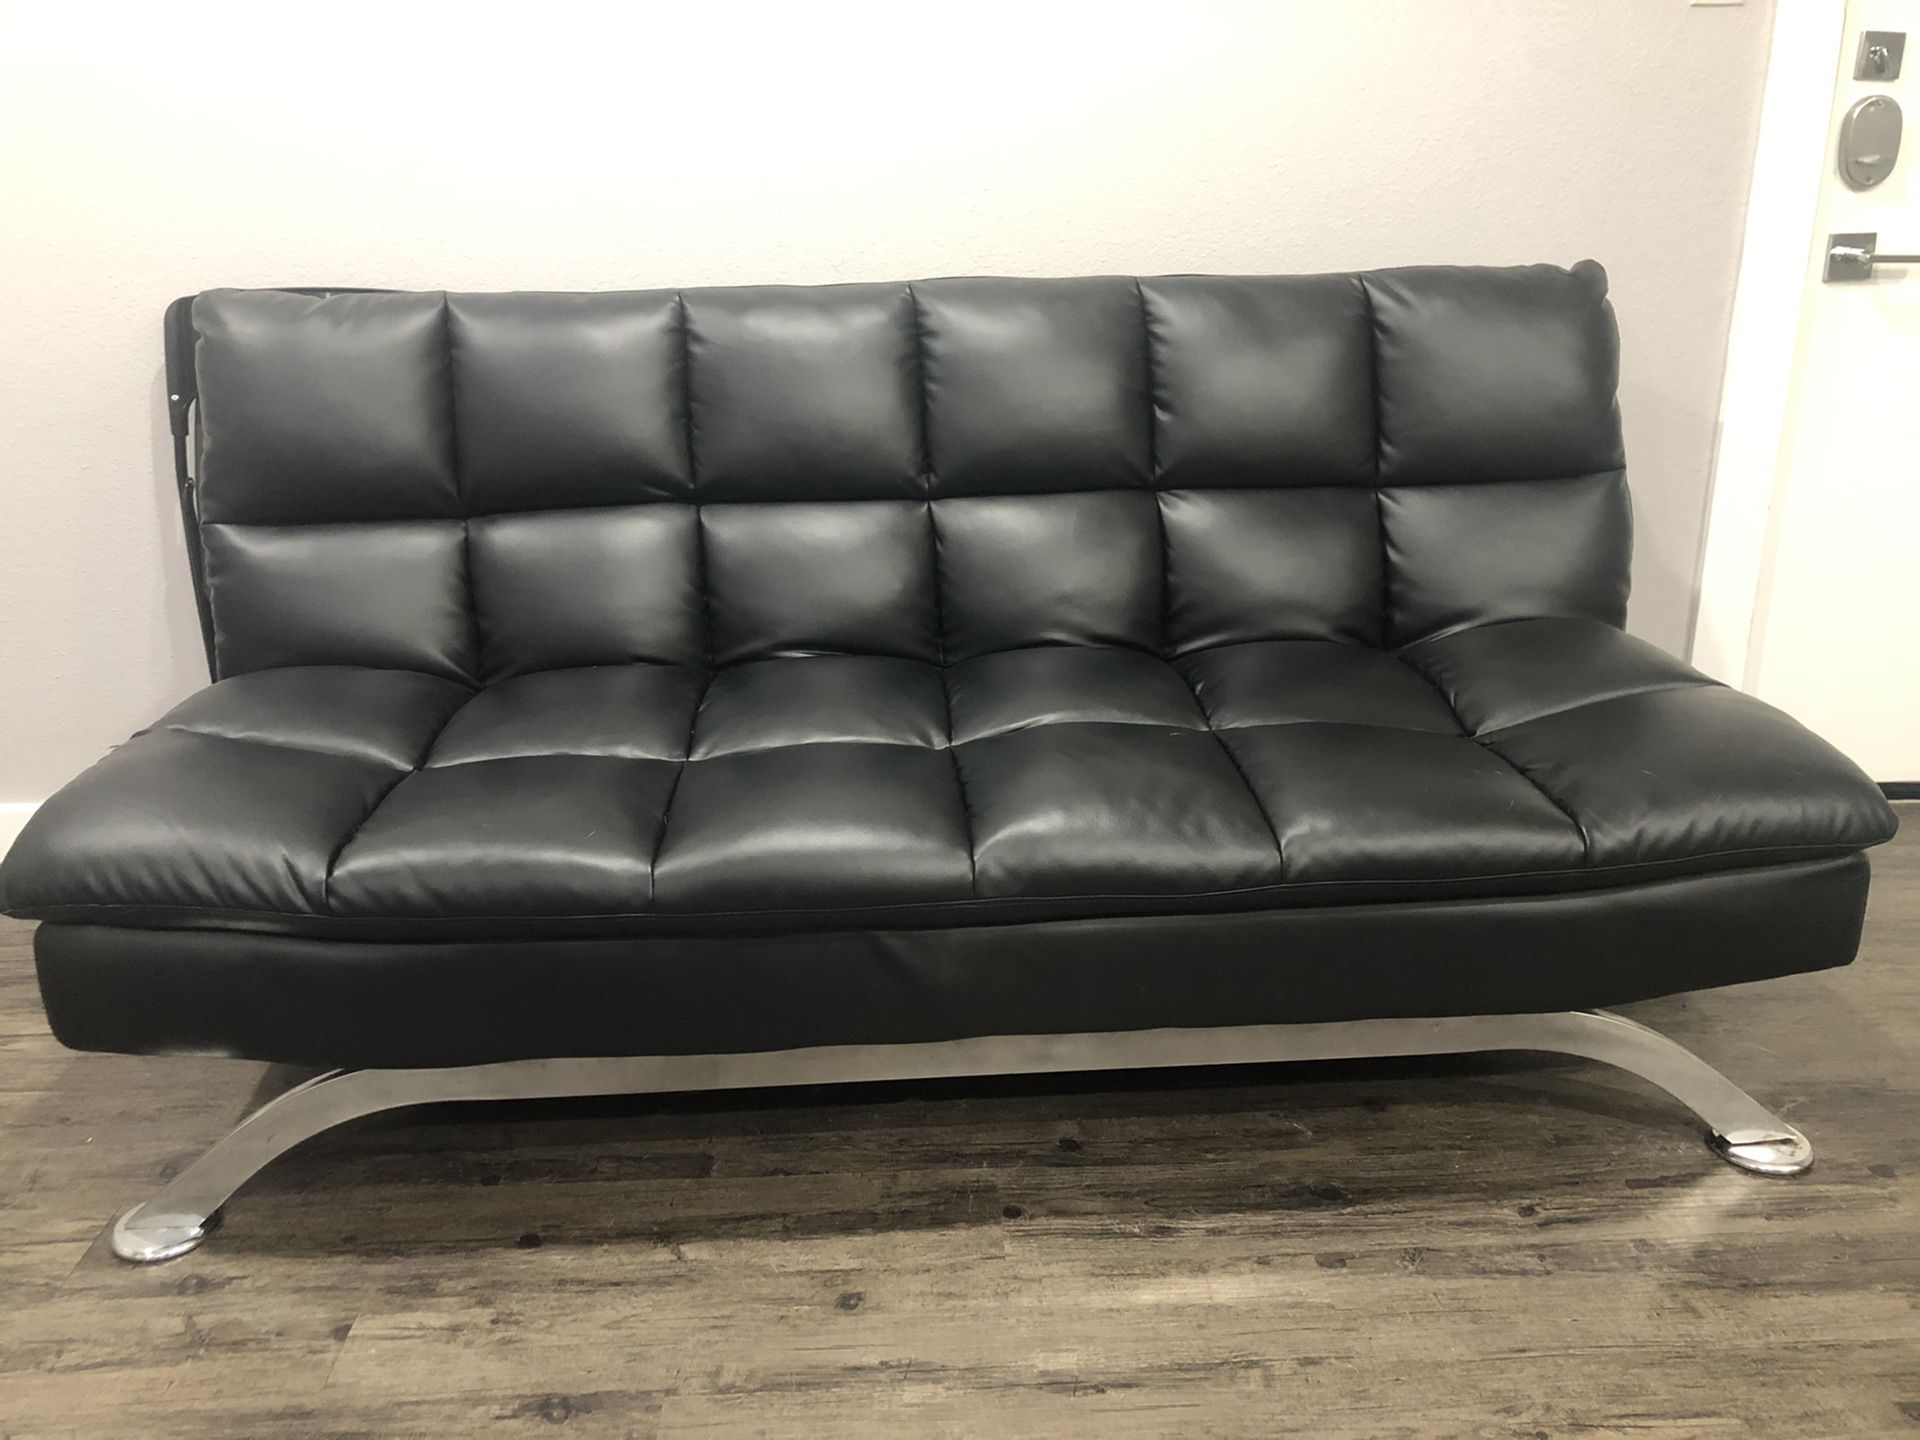 Foldable Black Leather couch